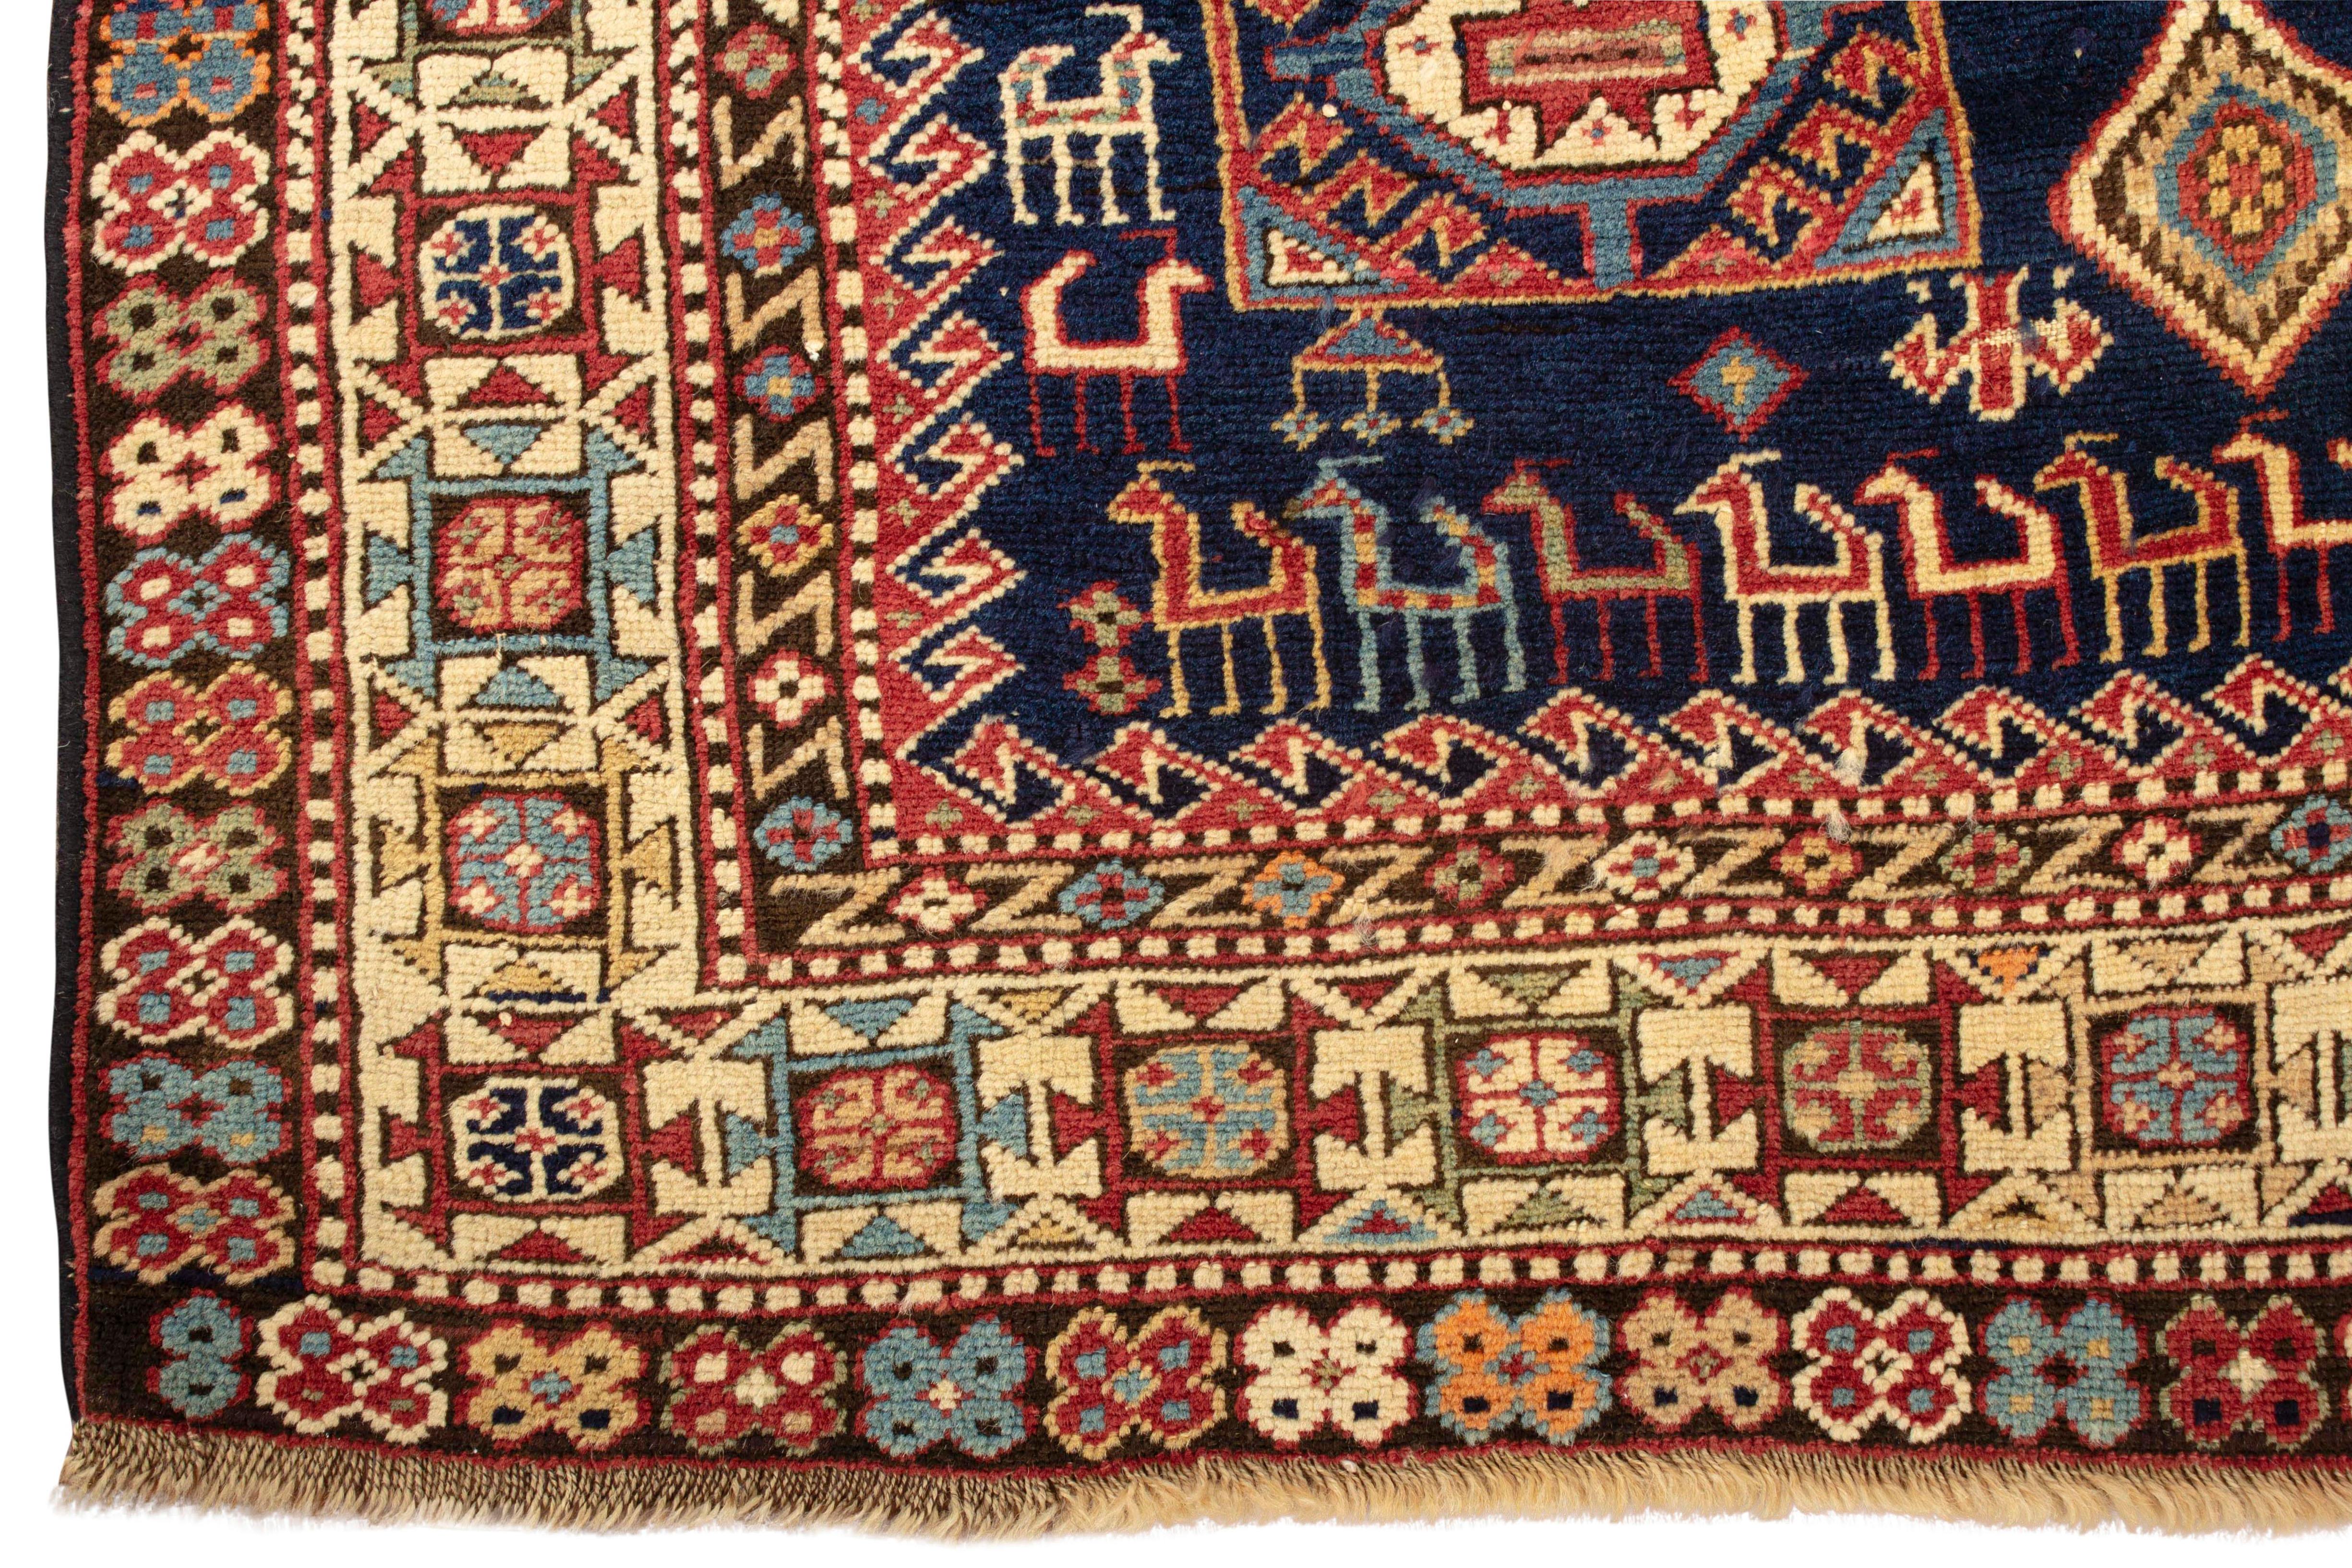 Antique Caucasian Shirvan rug, circa 1880. These types of antique Caucasian rugs were woven in the eastern part of the region, mostly along the west coast of the Caspian Sea. The wonderful main field with two diamond lozenges on a navy ground filled